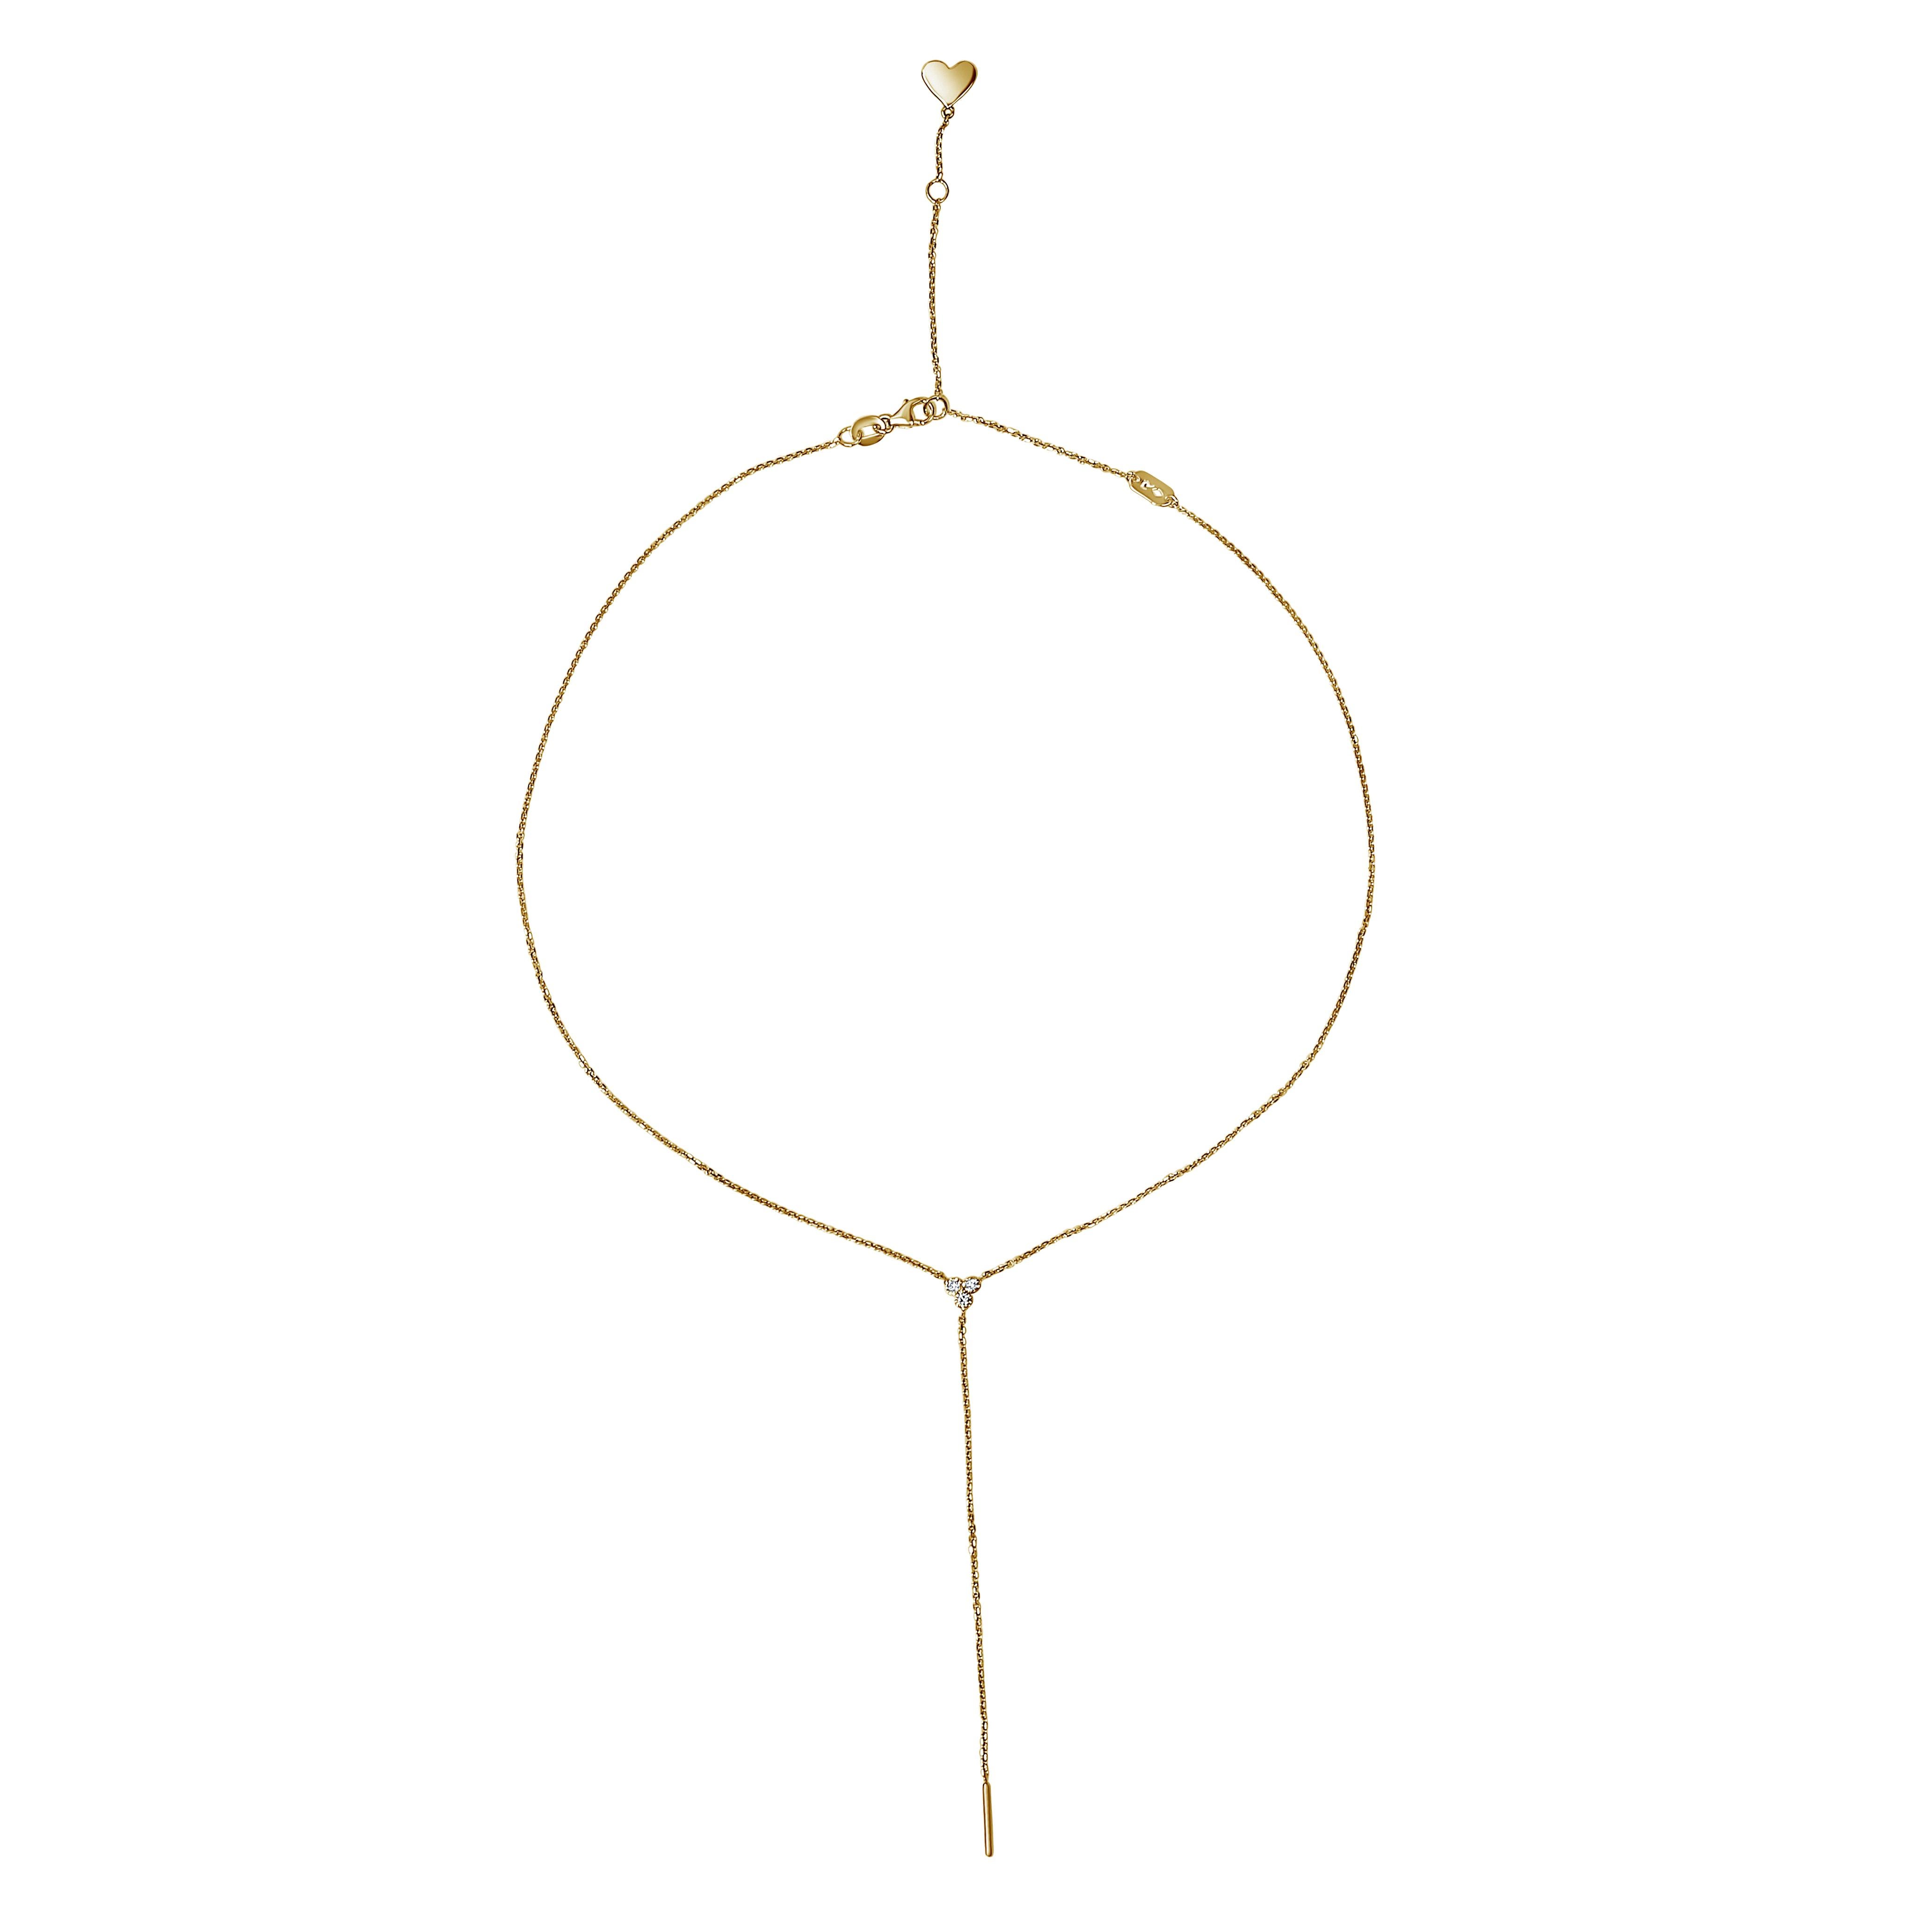 Diamond Trinity Lariat Y Necklace 14 Karat Yellow Gold - Shlomit Rogel

Shine bright in this youthful yet elegant trinity lariat necklace. Crafted from 14k yellow gold, the chain is adorned with three genuine white diamonds totaling 0.145 carat. A